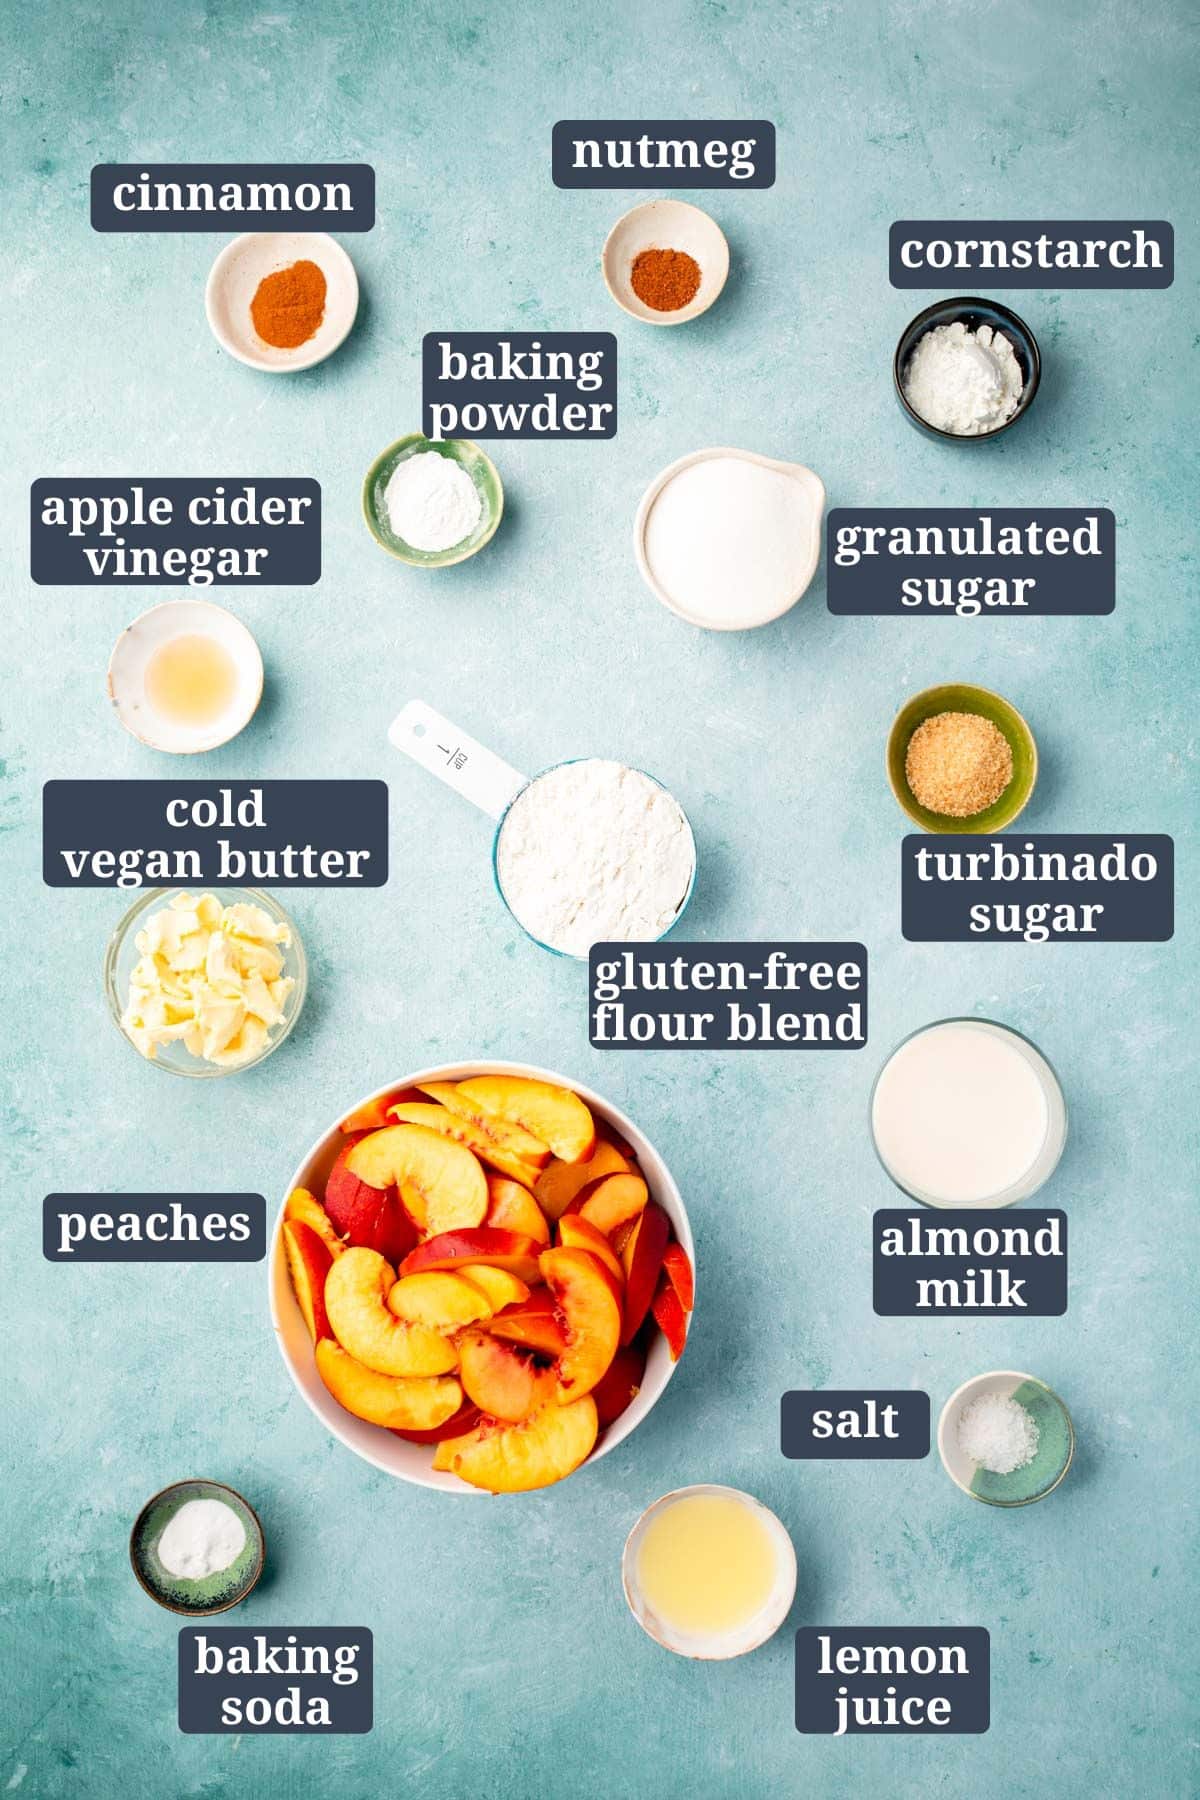 Small bowls of ingredients on a blue table for making gluten-free vegan peach cobbler with text overlay over each ingredient..